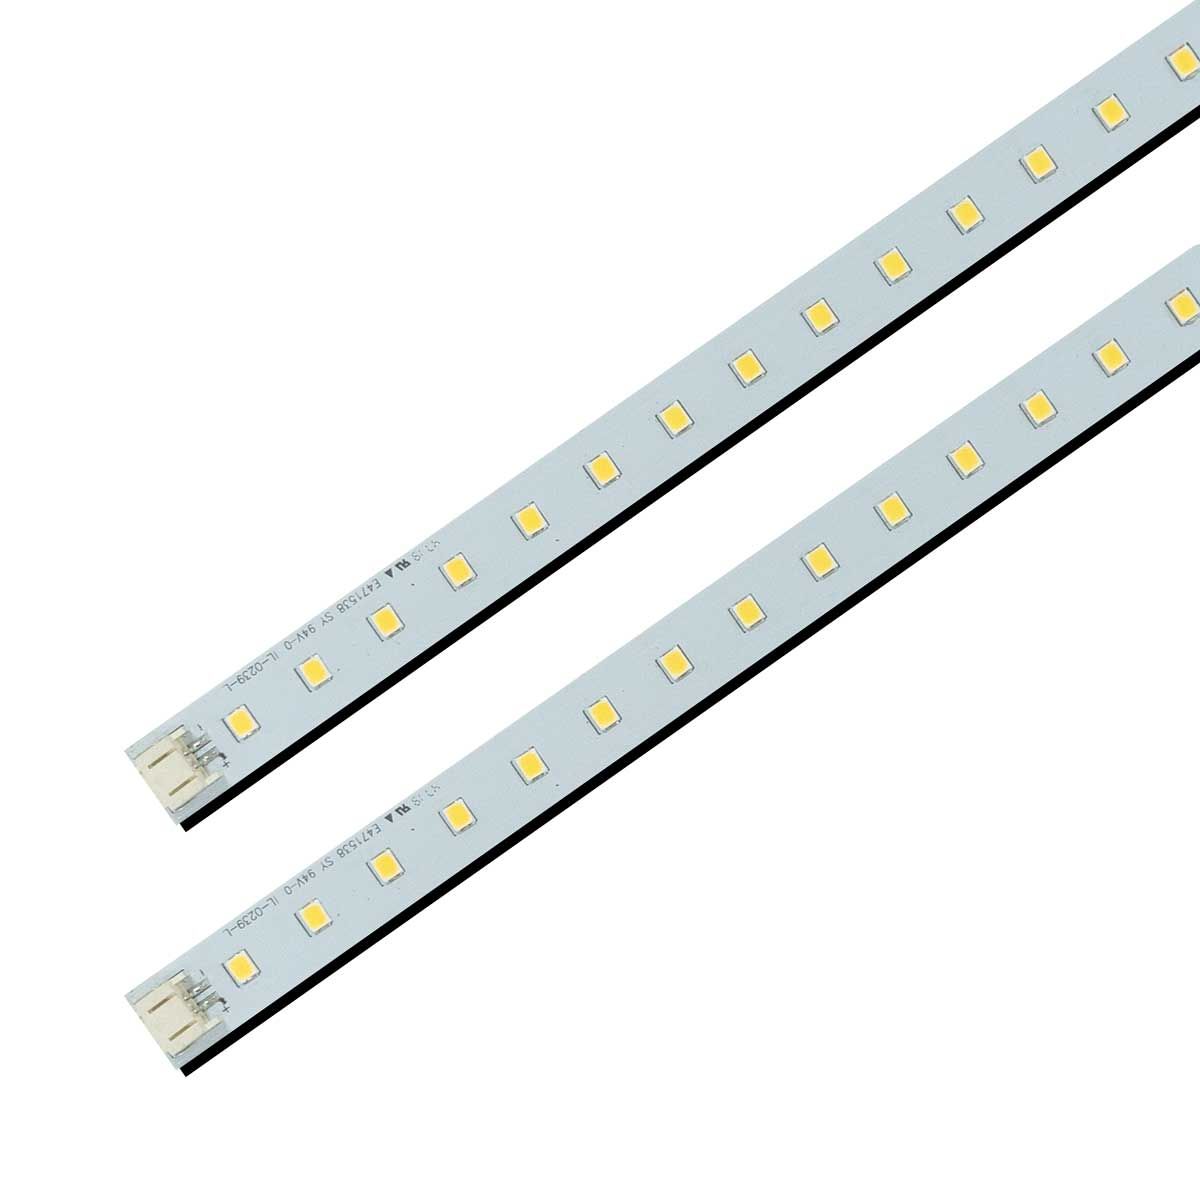 Fluorescent Lights To Led, How To Replace Fluorescent Light Bulb Cover